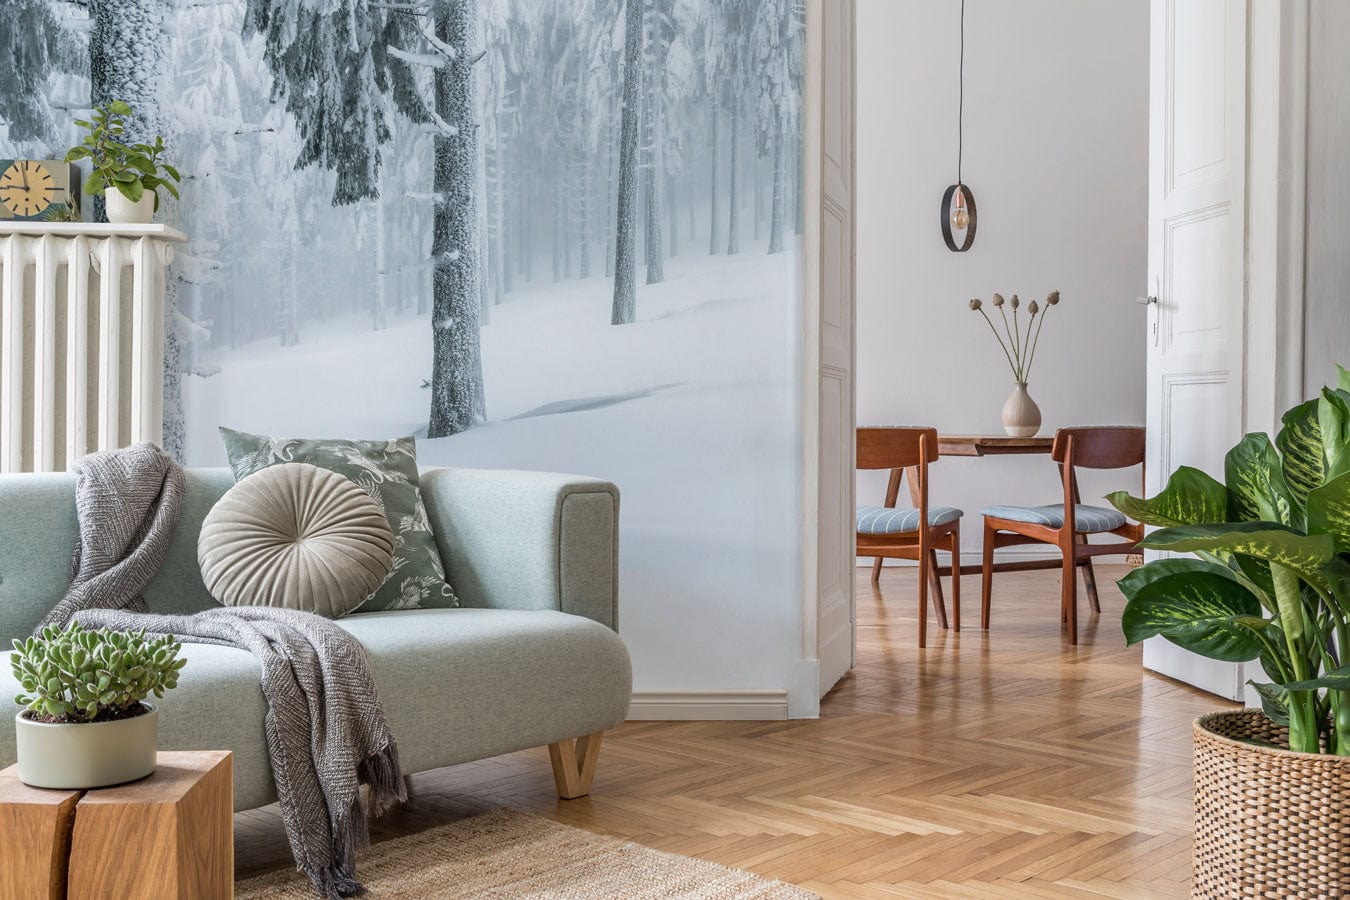 Decorate Your Home with this Winter Scene of a Forest on Snowy Wallpaper